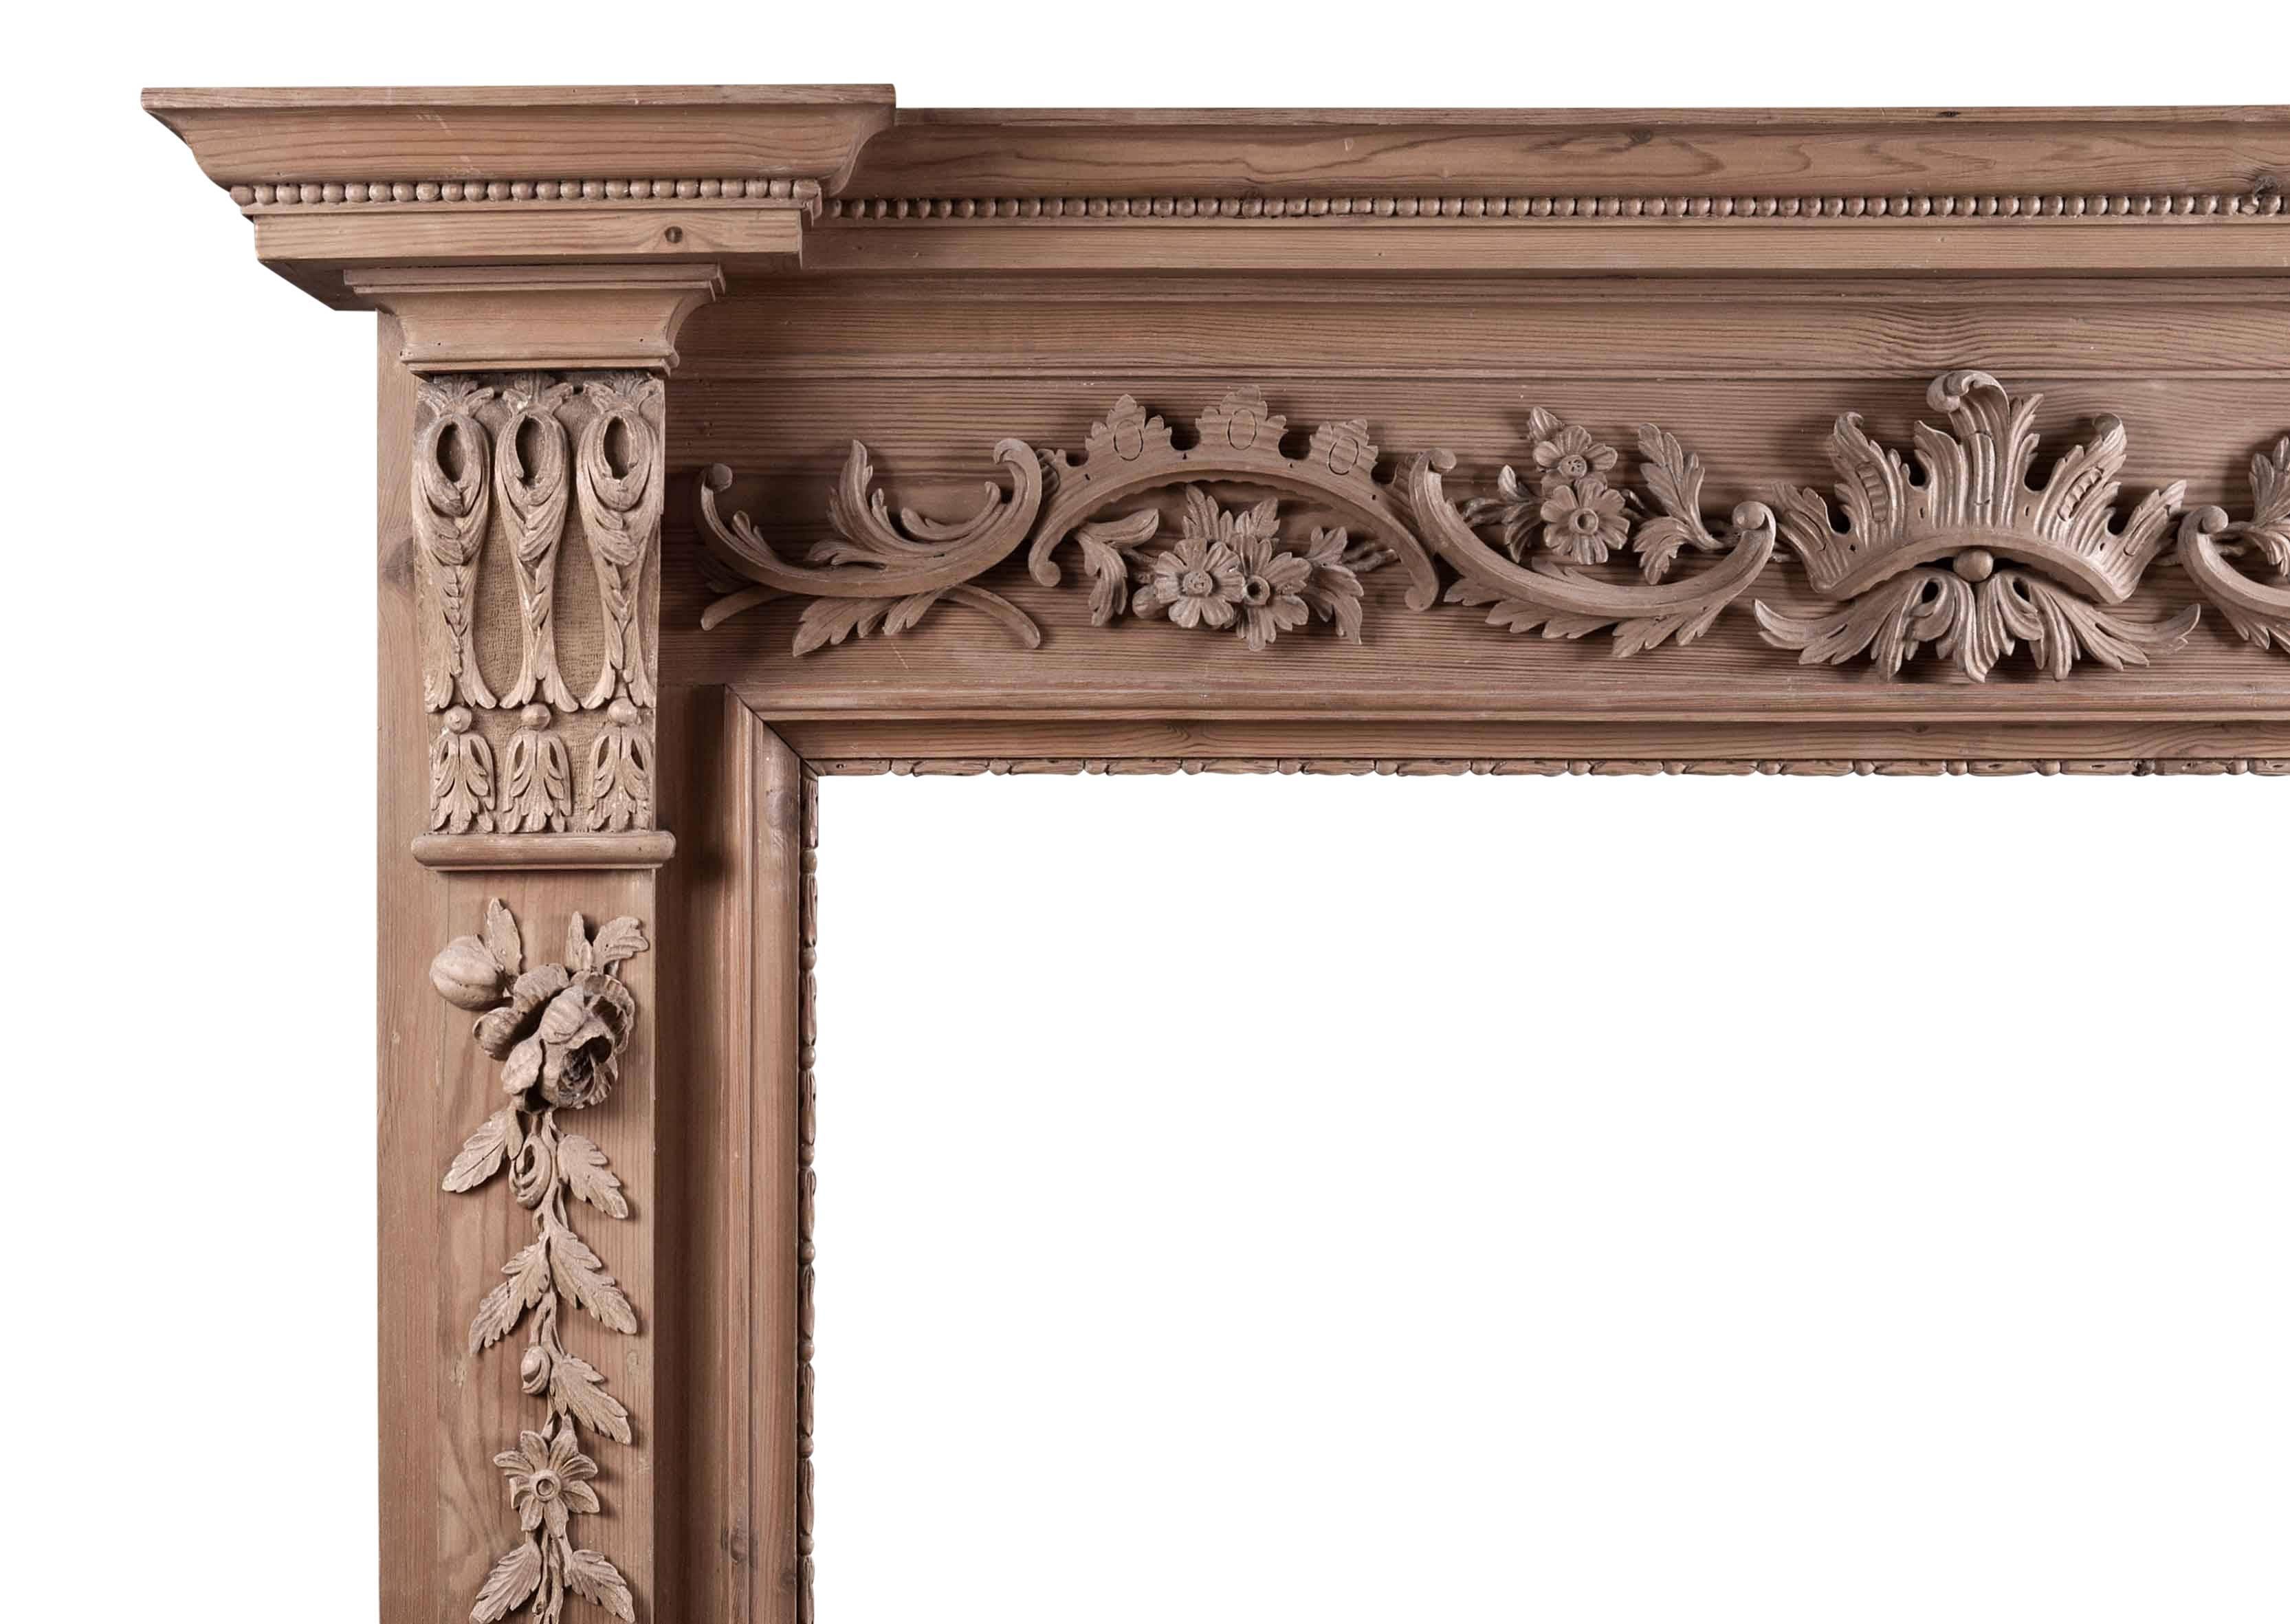 An English carved pine fireplace, the frieze of carved c-scrolls and foliage, the jambs with drops of fruit and leaves, surmounted by carved brackets and breakfront shelf, 20th century.

Measures: 
Shelf Width:	1650 mm      	65 in
Overall